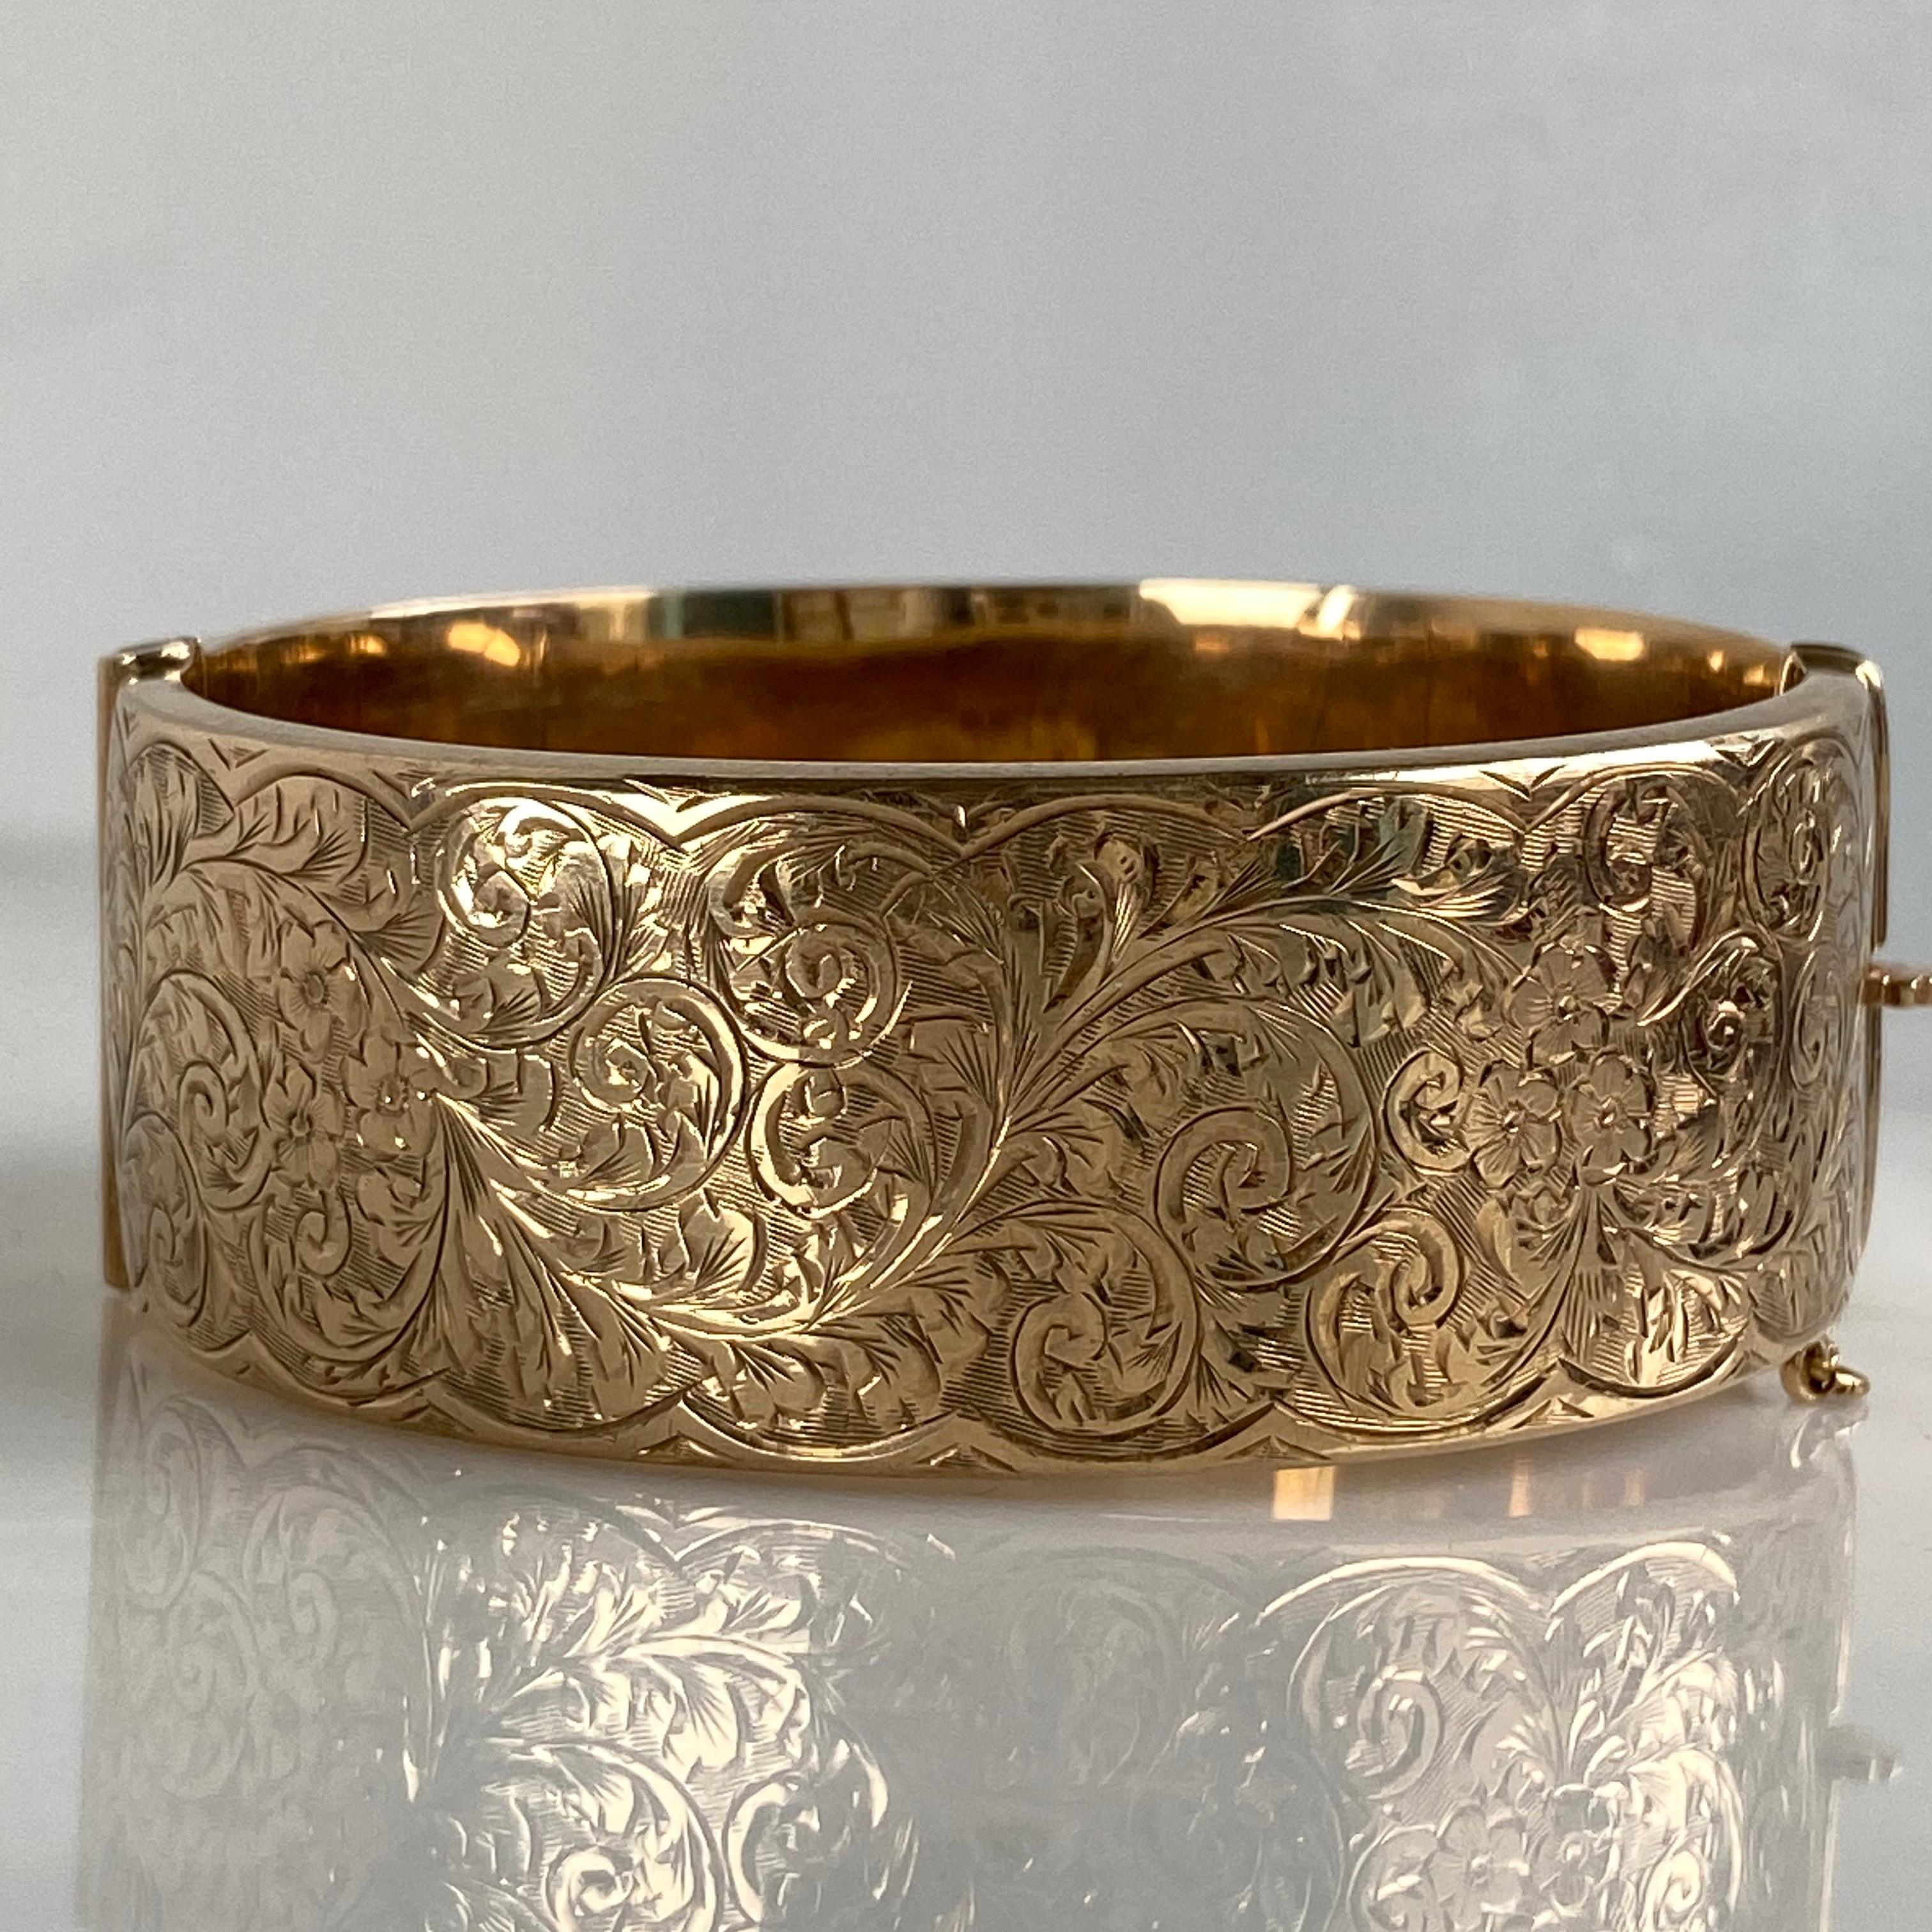 Details:
Sweet Victorian 9K gold bracelet. Lovely delicate floral engraving pattern along the front, smooth rose gold back. It has a very secure clasp. The bracelet opens wide and freely which makes it very easy to put on and wear. There are